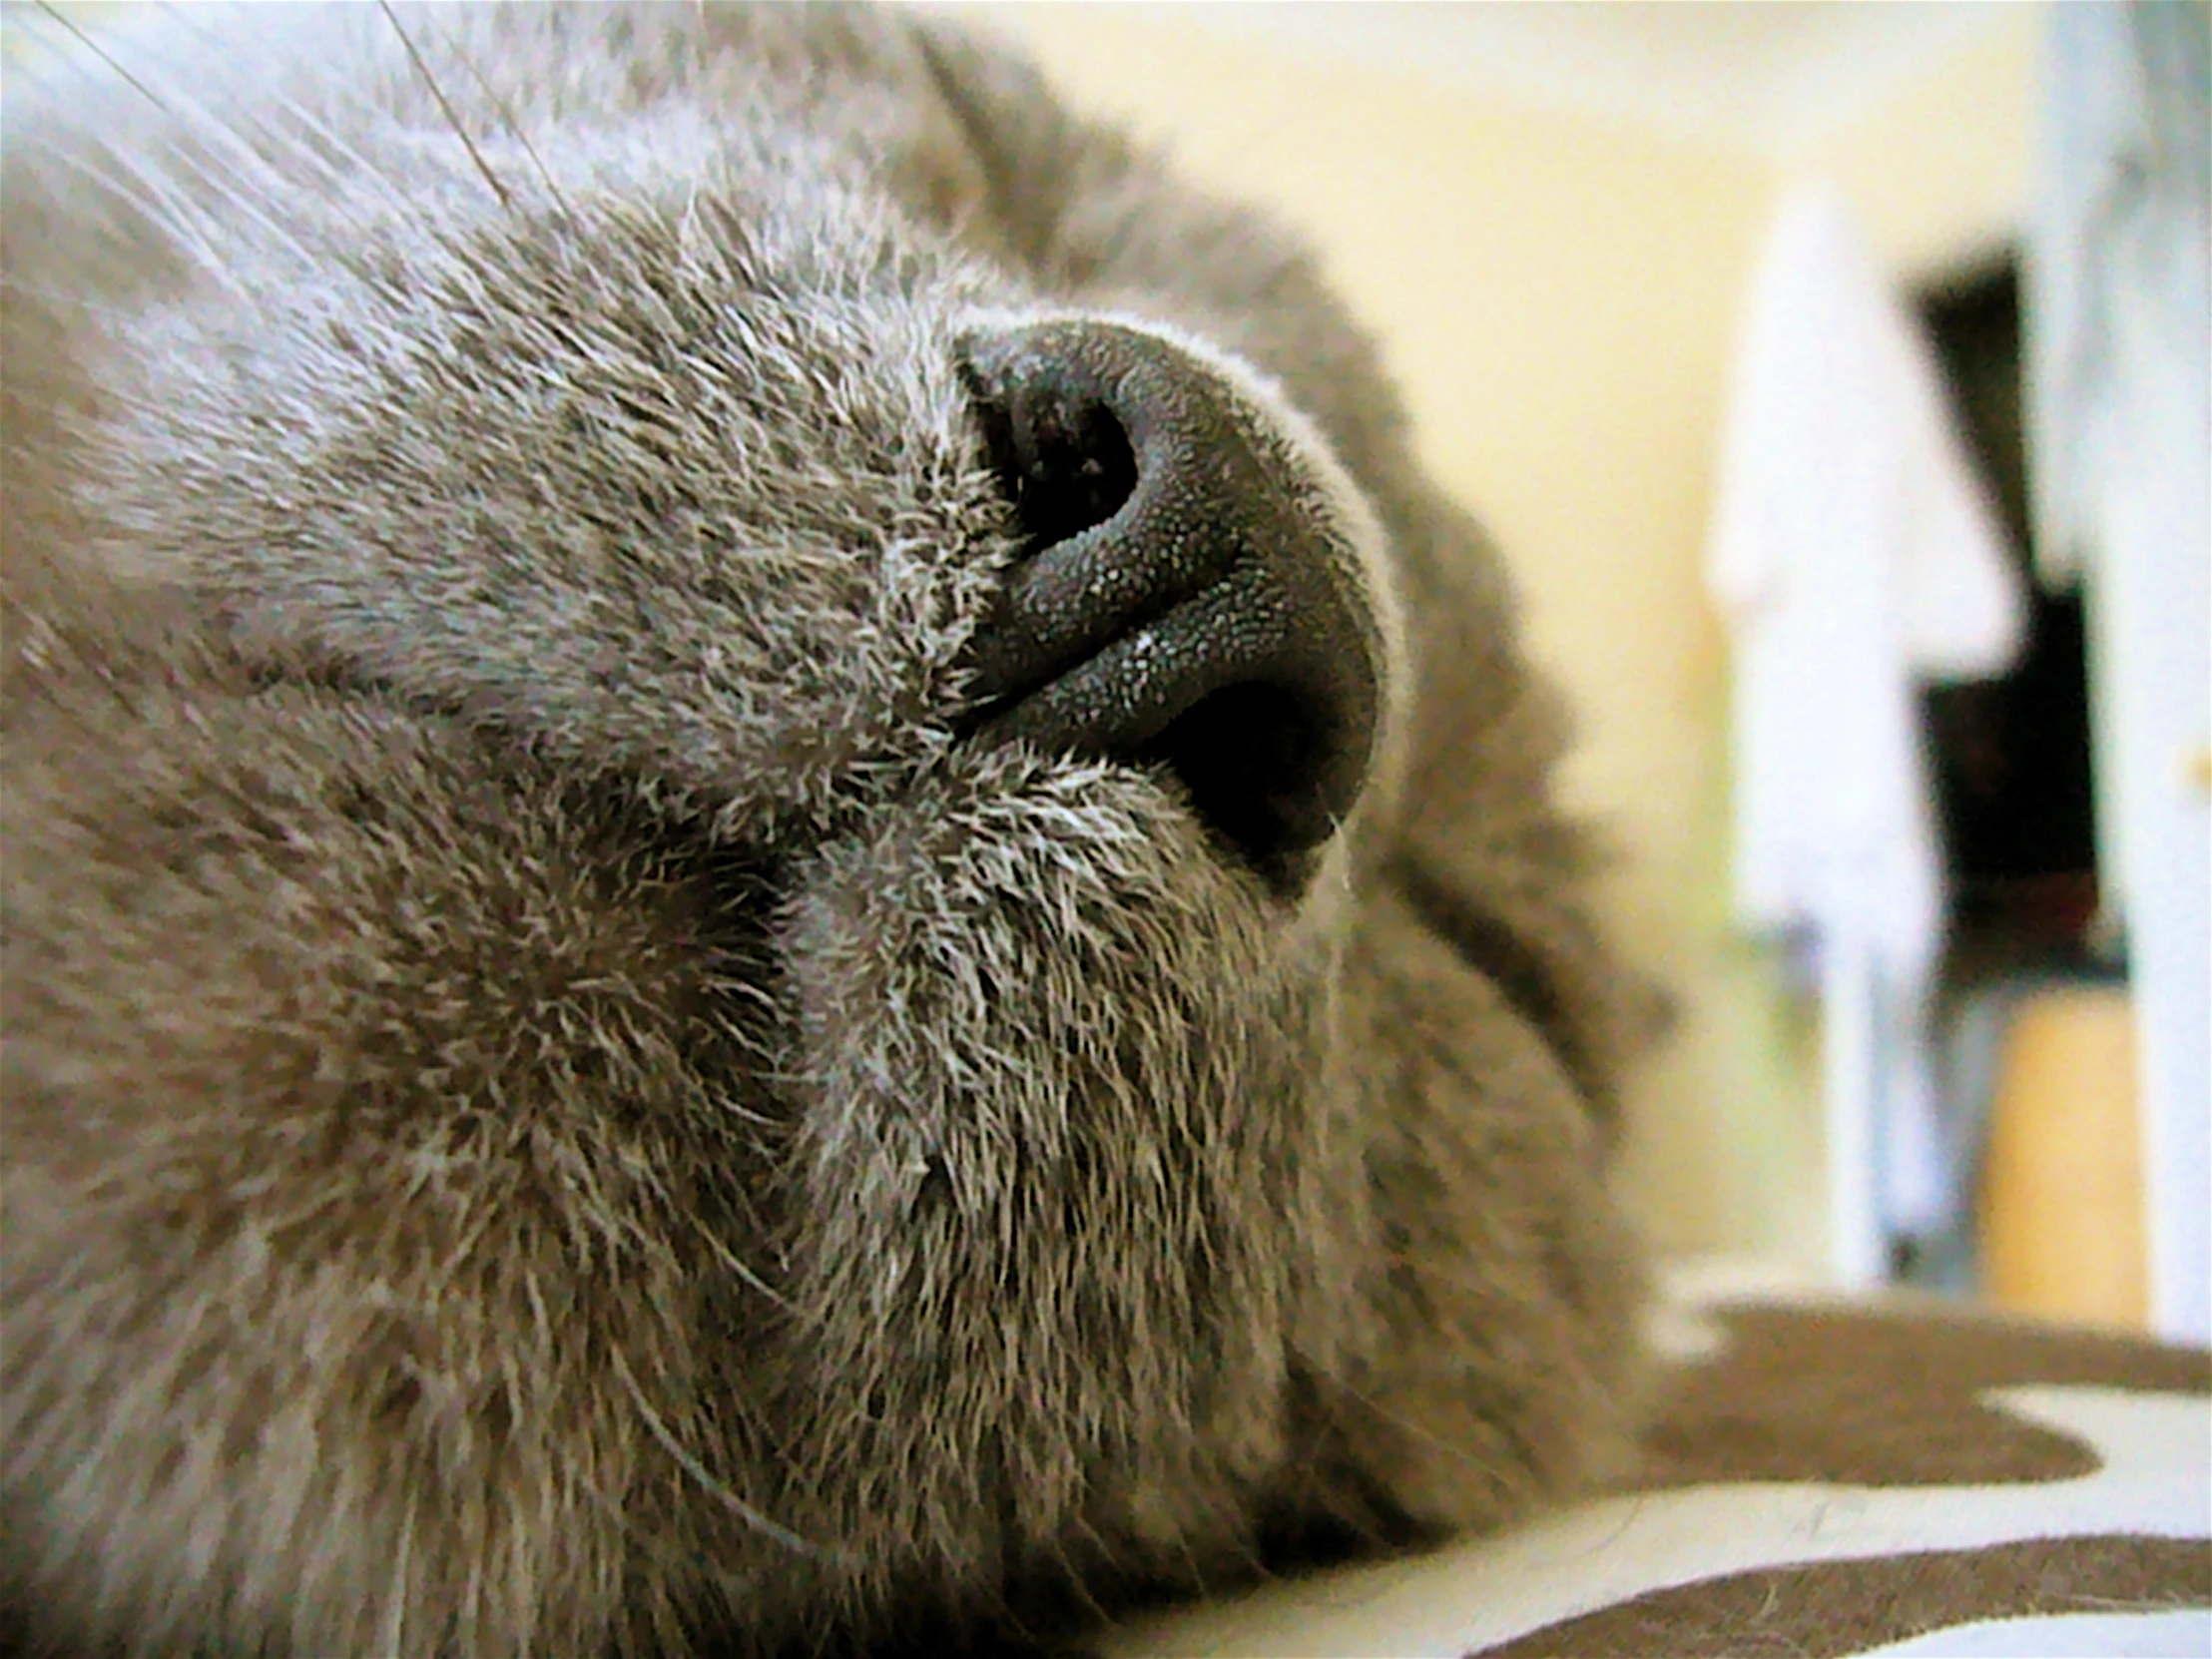 the nose of a very cute furry animal